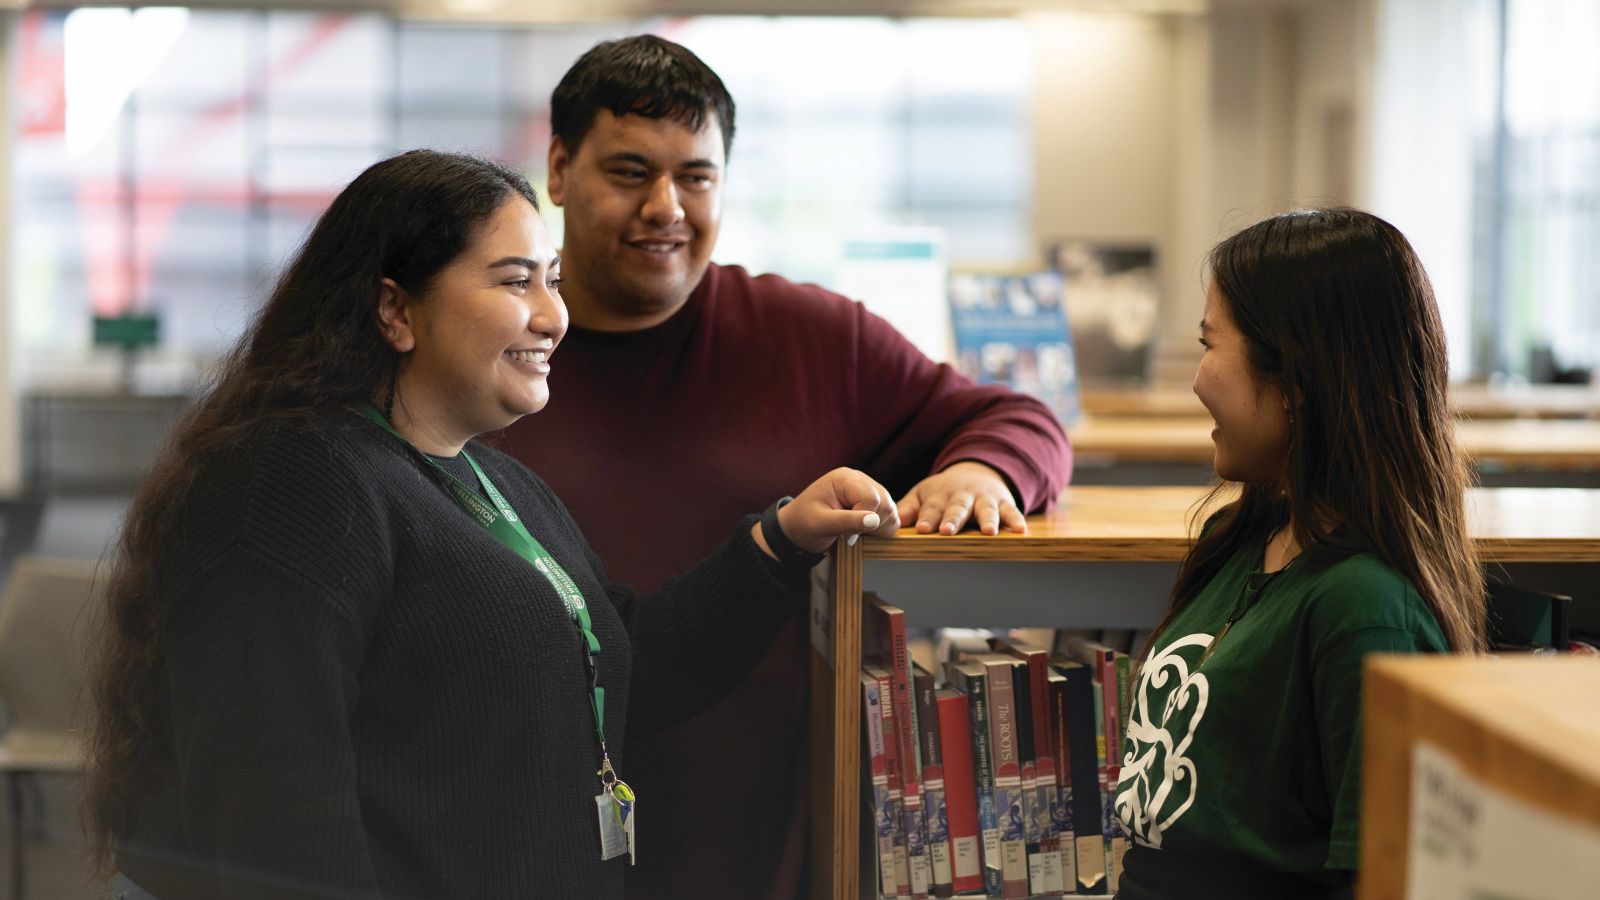 A young Māori woman and man talking to another student in front of a bookshelf.